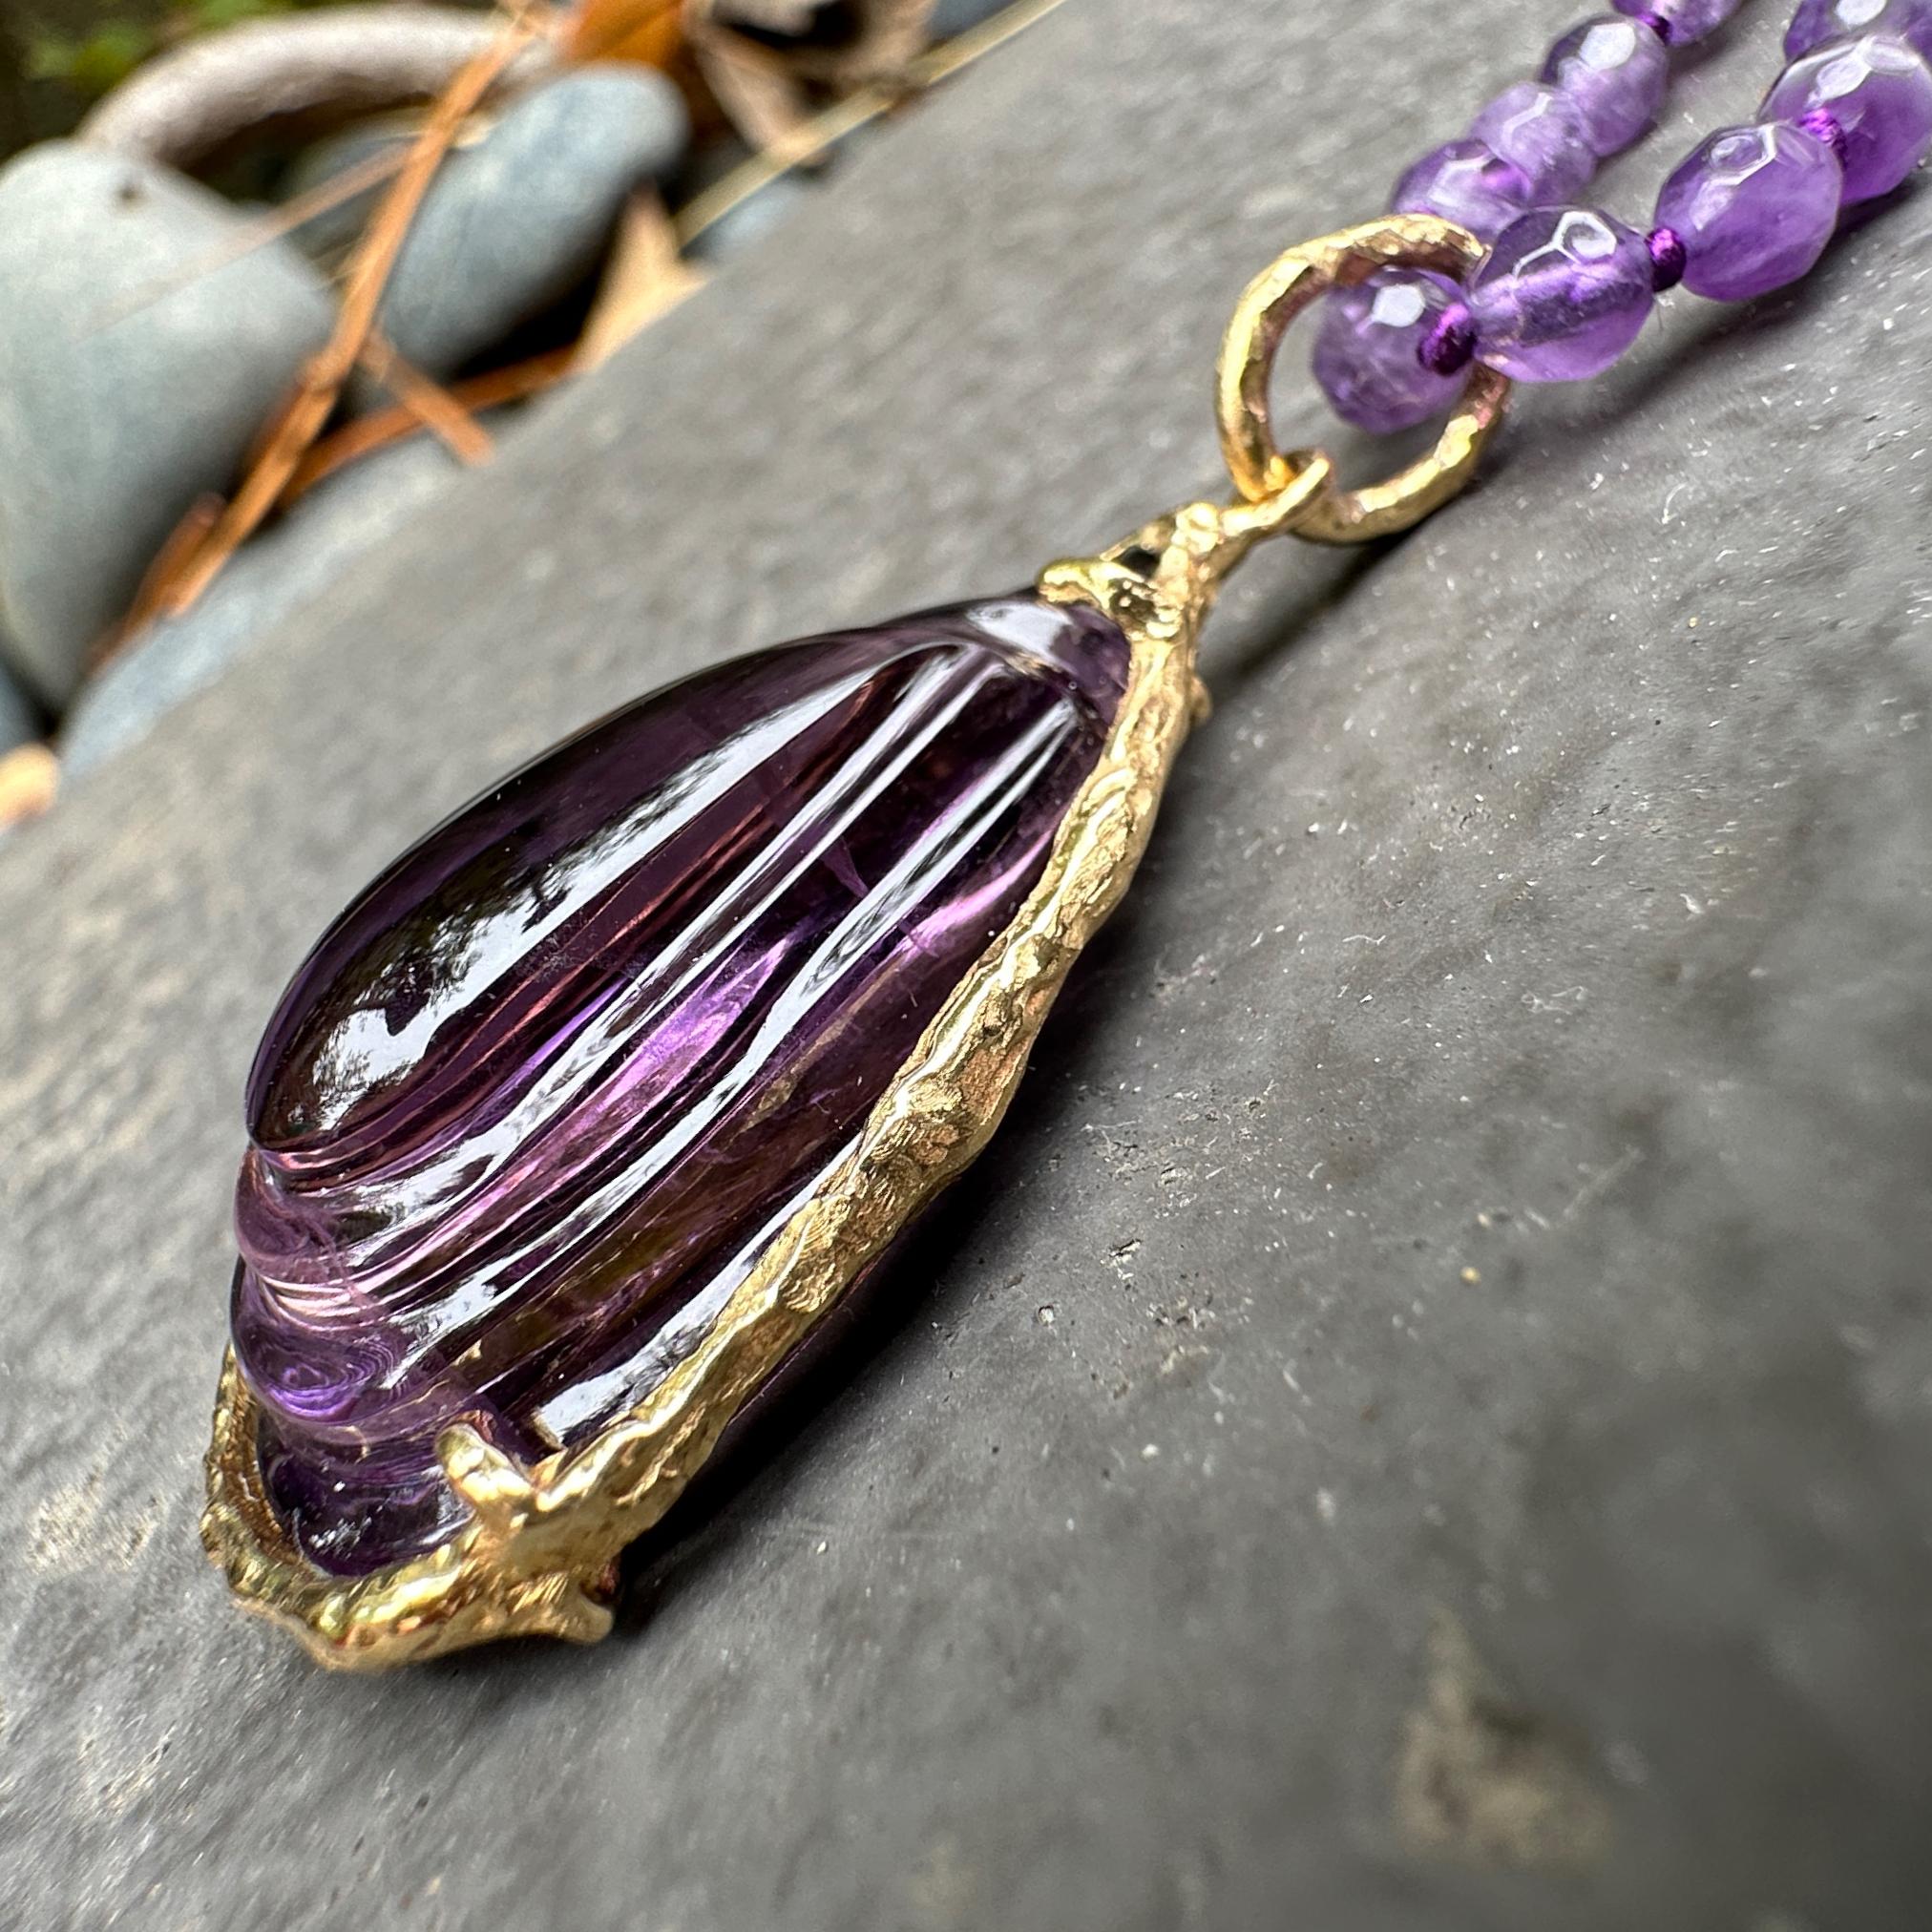 39 Carat Carved Amethyst Pendant in 18K Gold on Convertible Amethyst Bead Chain For Sale 3